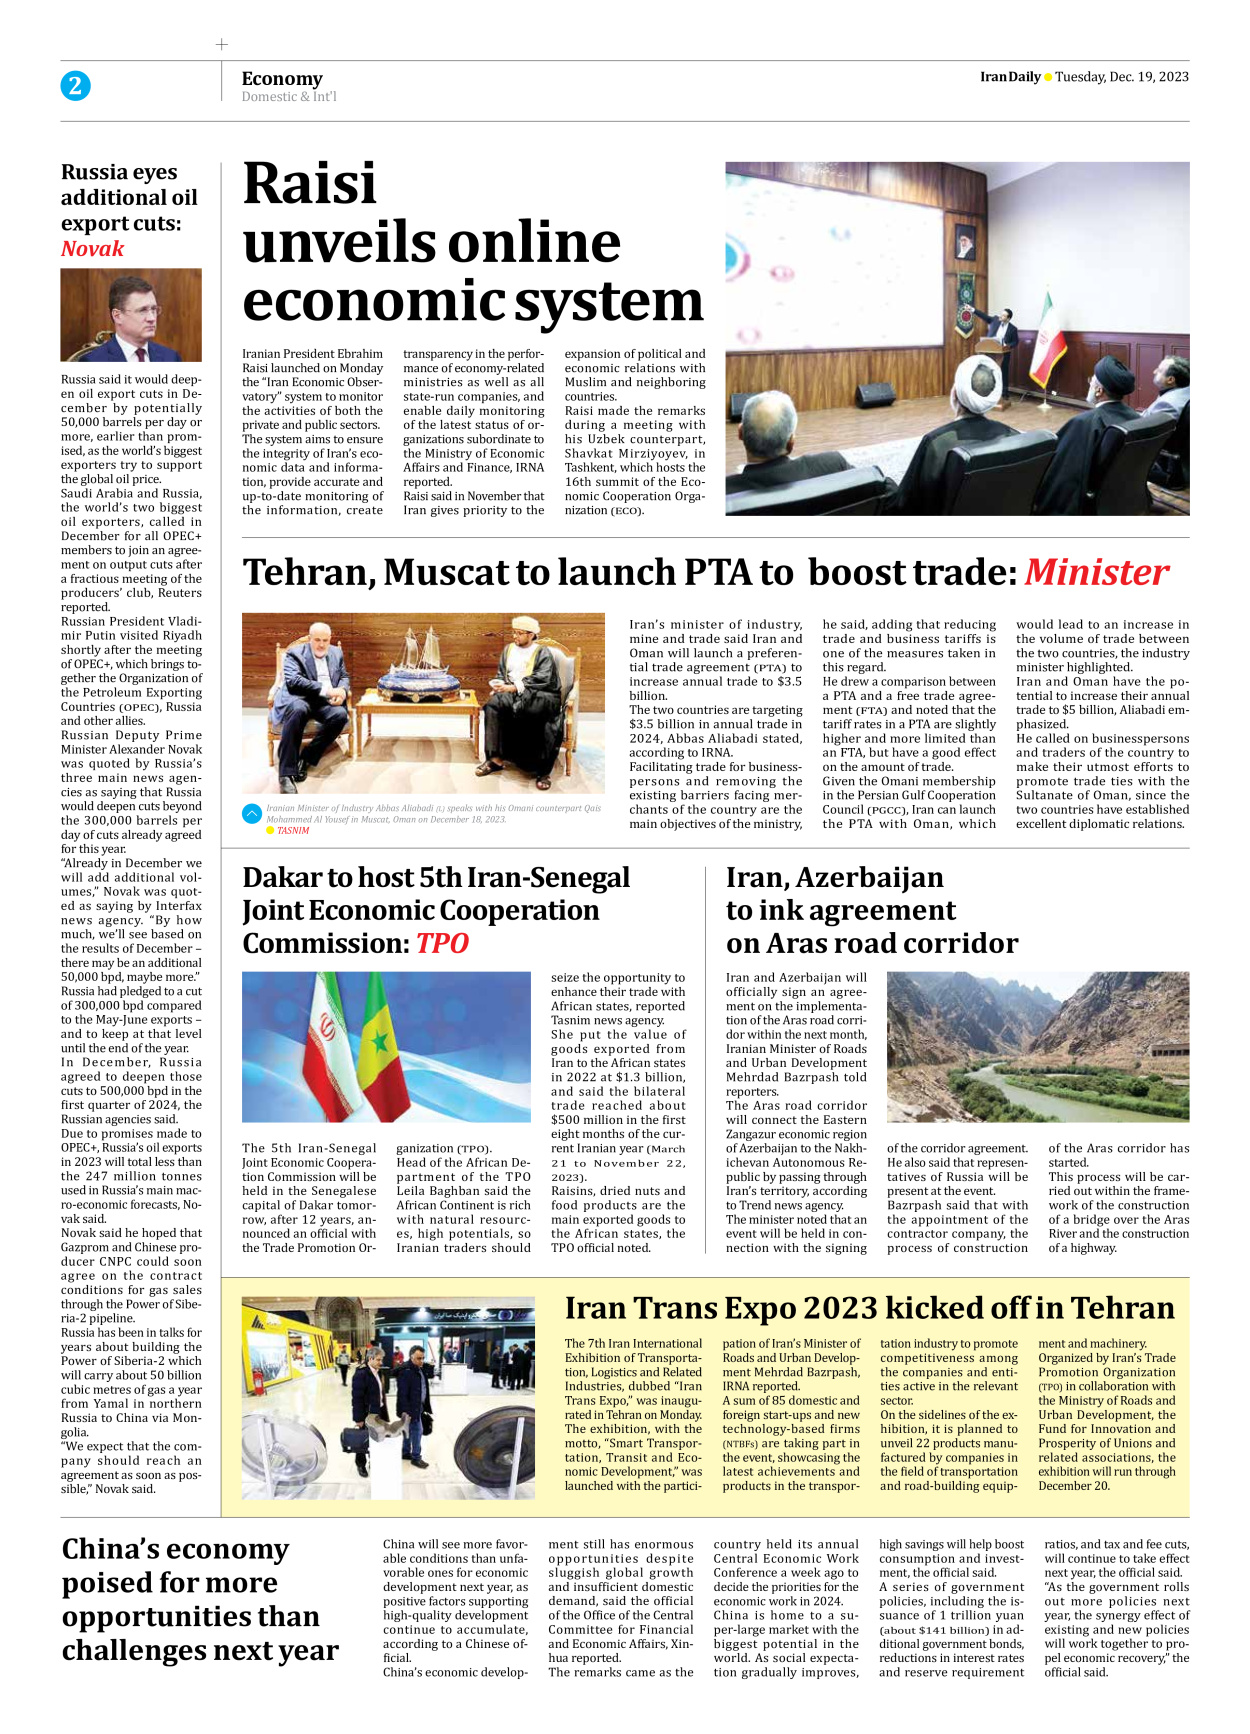 Iran Daily - Number Seven Thousand Four Hundred and Sixty Two - 19 December 2023 - Page 2